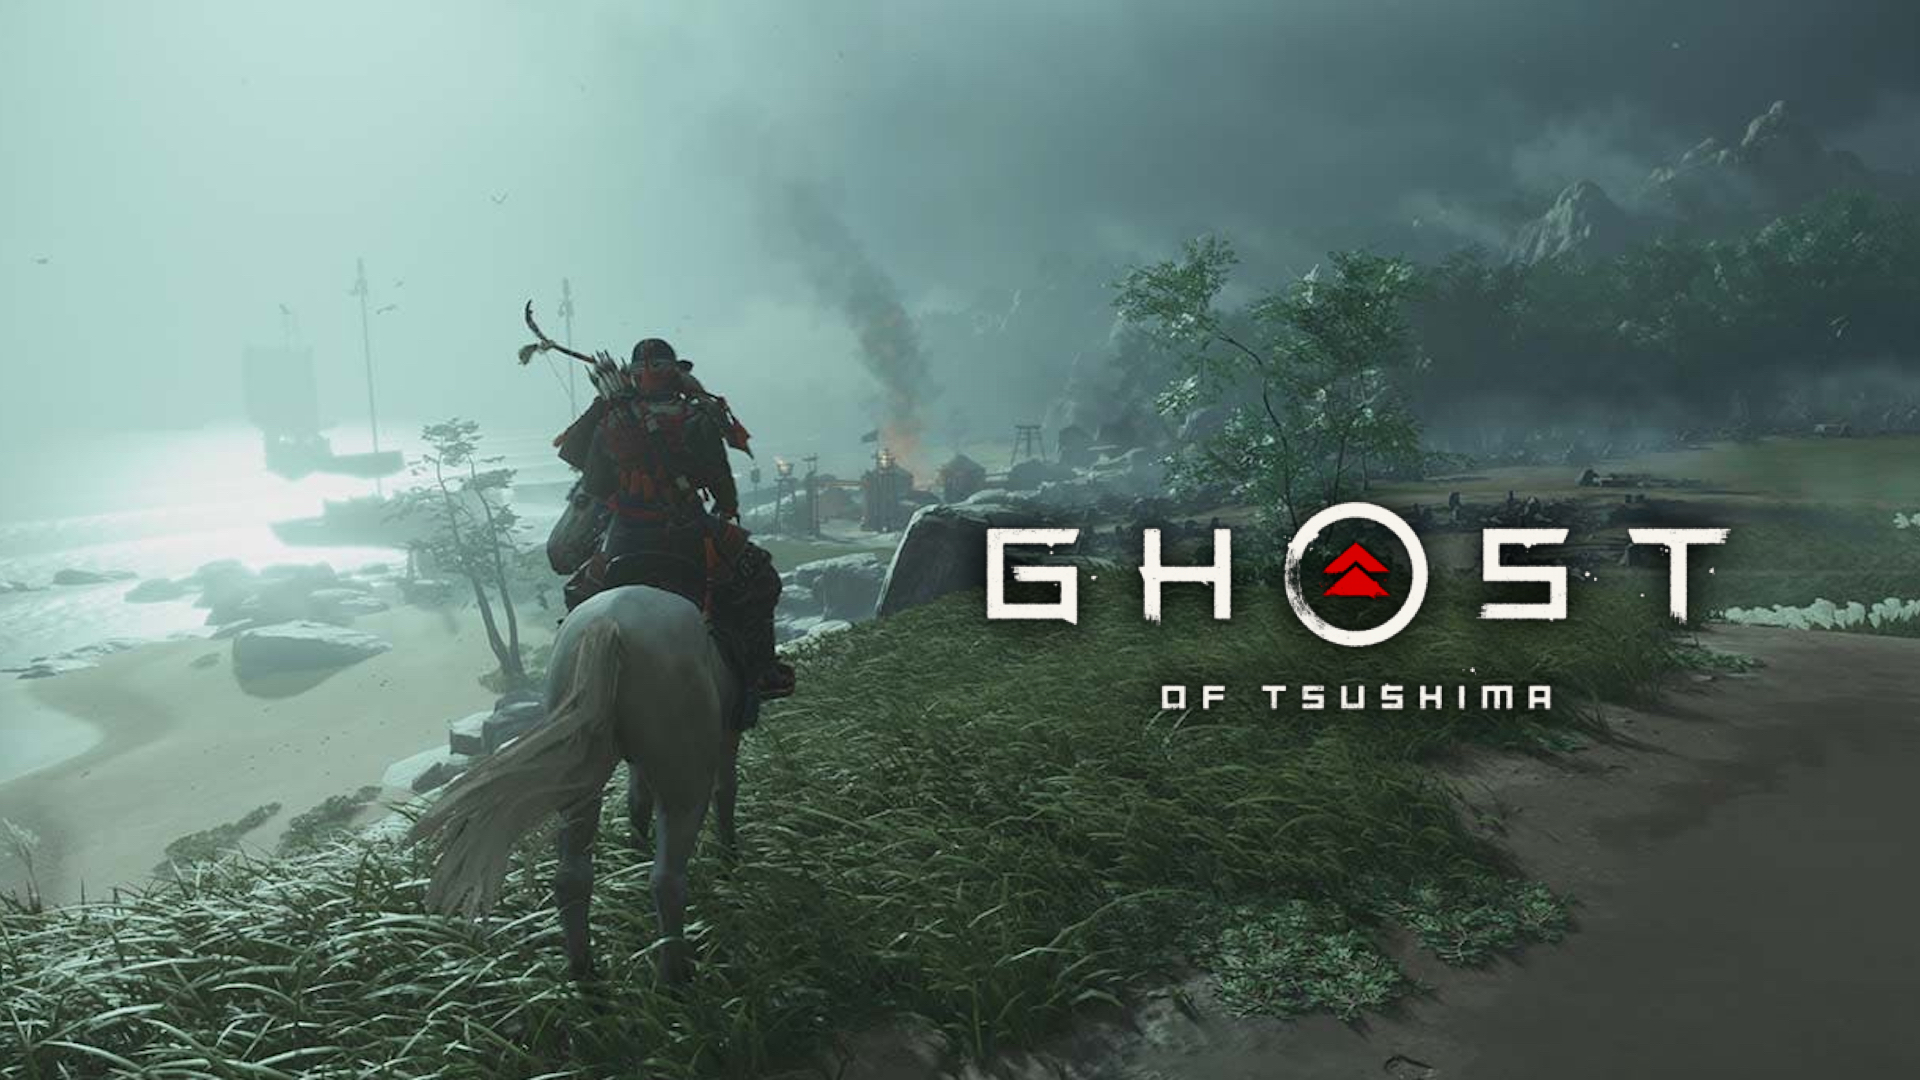 Ghost of Tsushima Will Require 50 GB of Storage Space